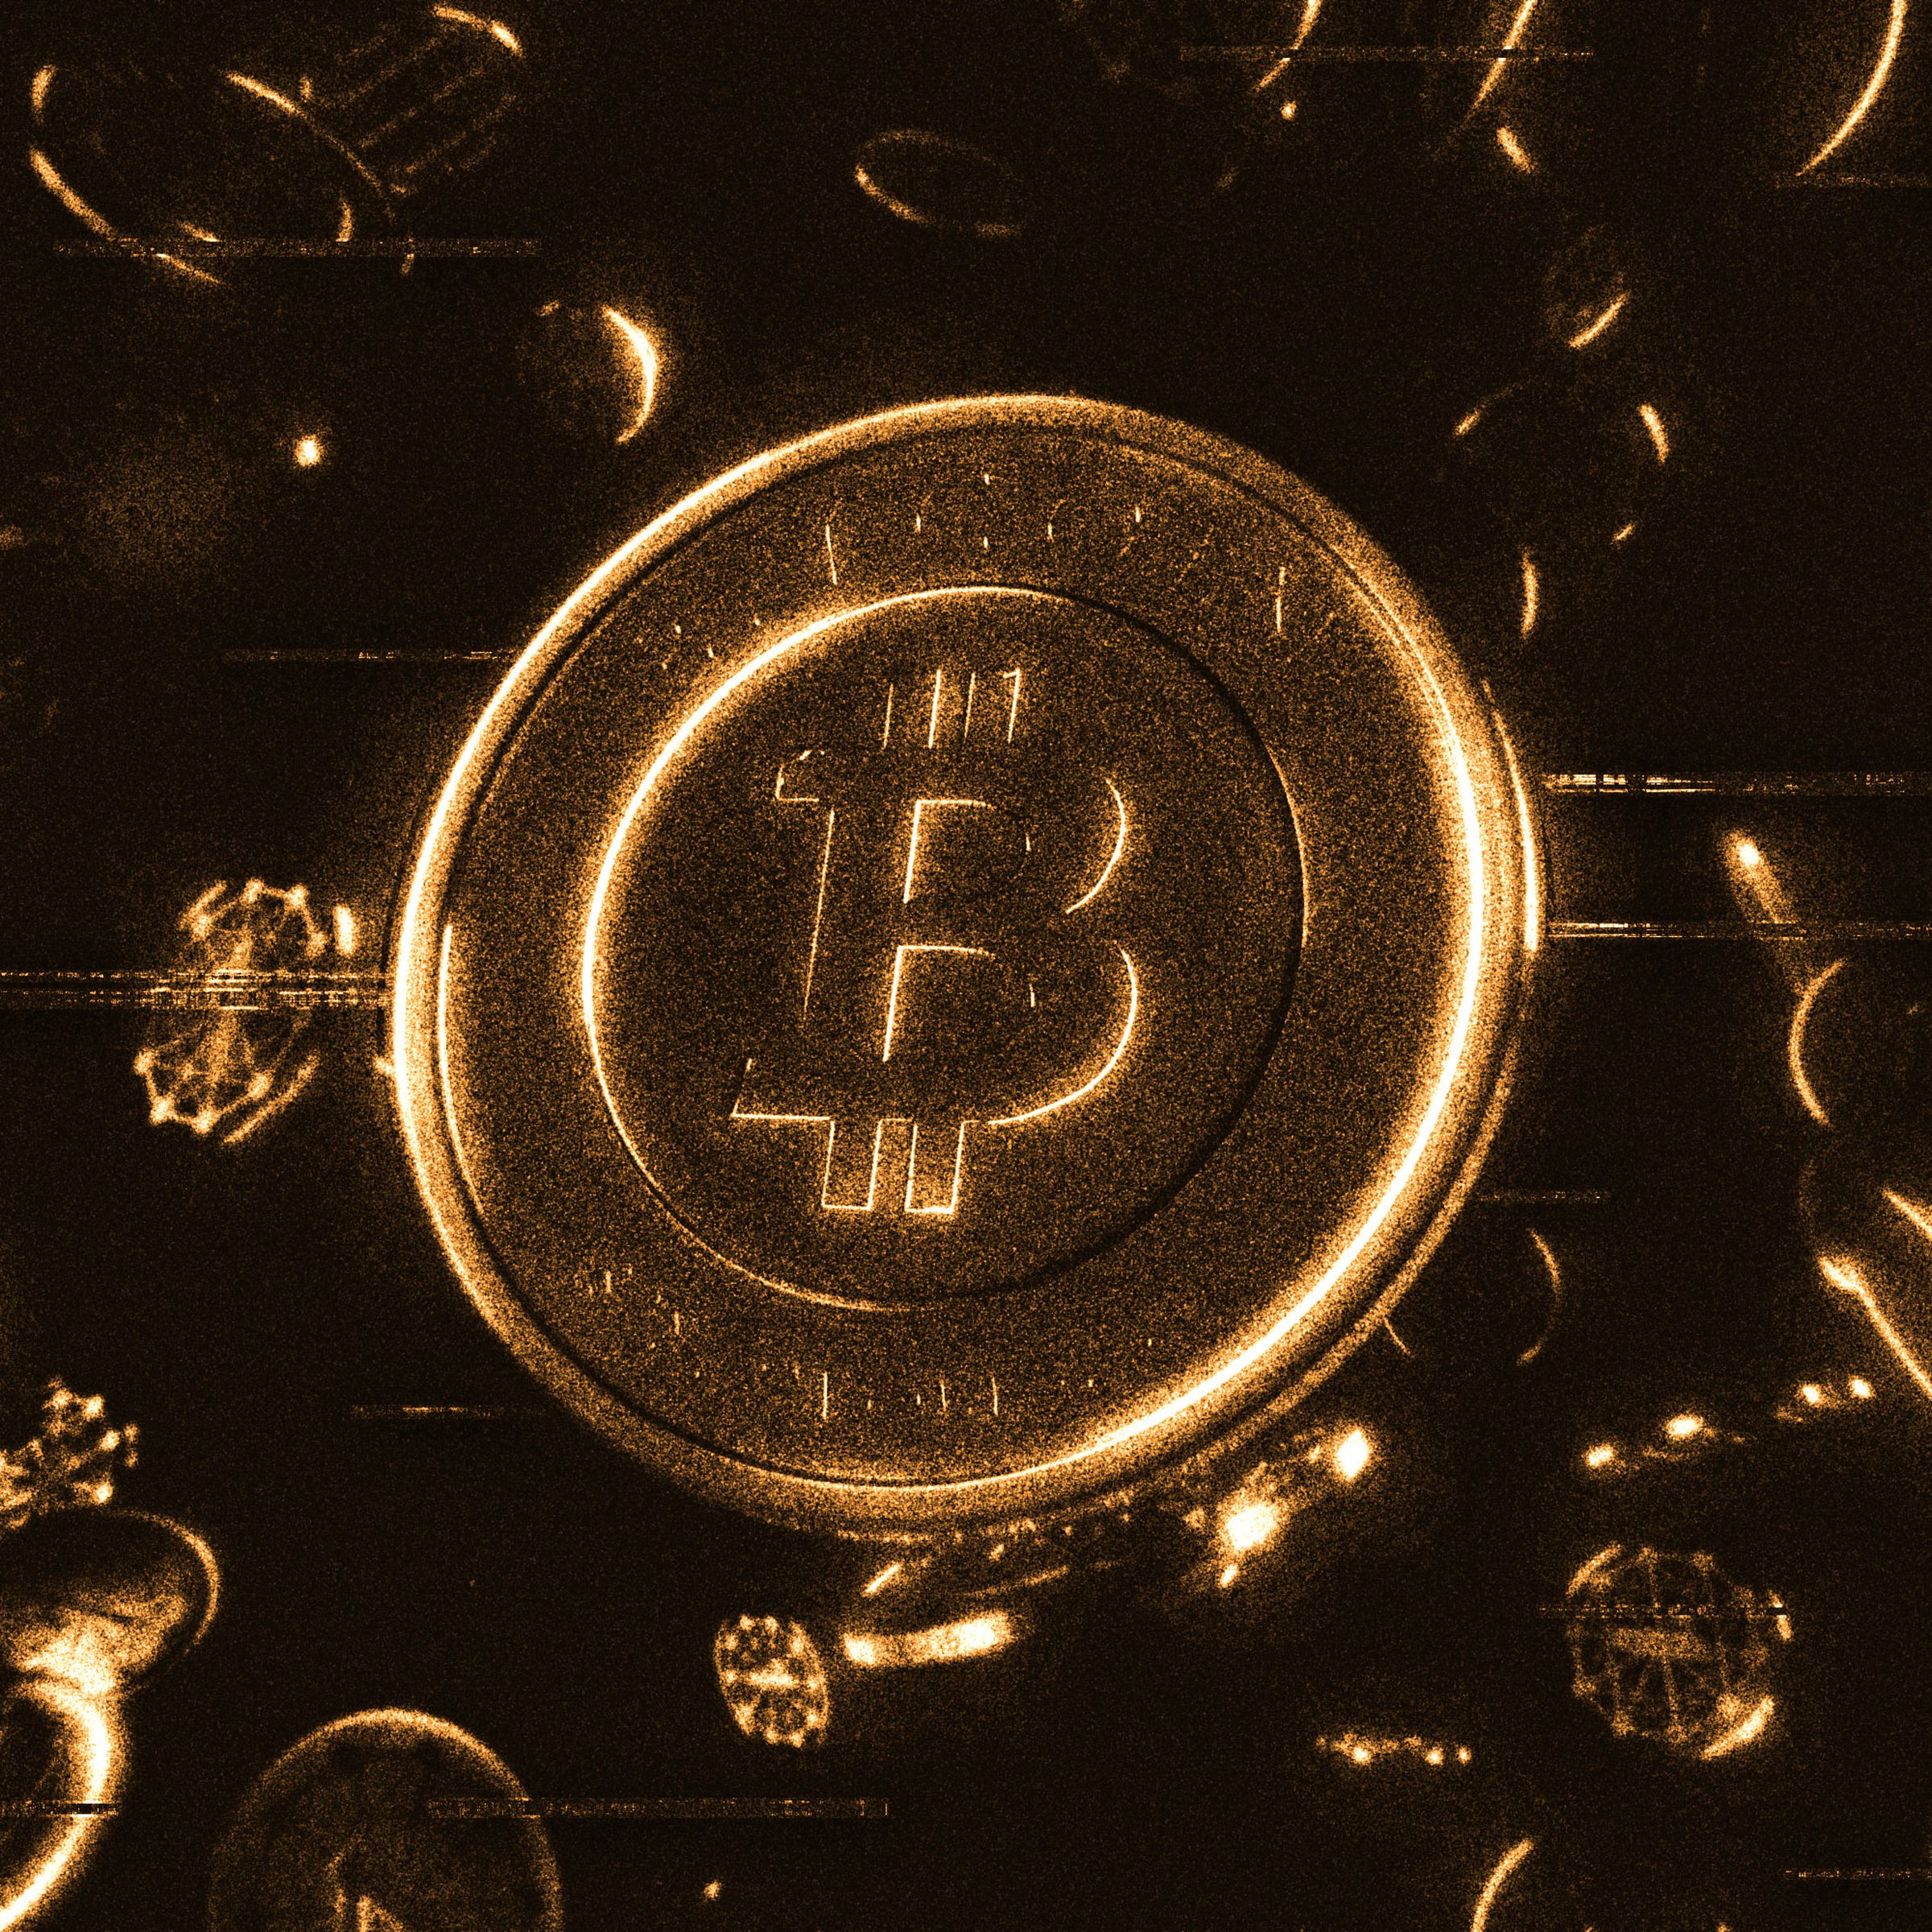 An image of the Bitcoin logo on a gold coin surrounded by other coins